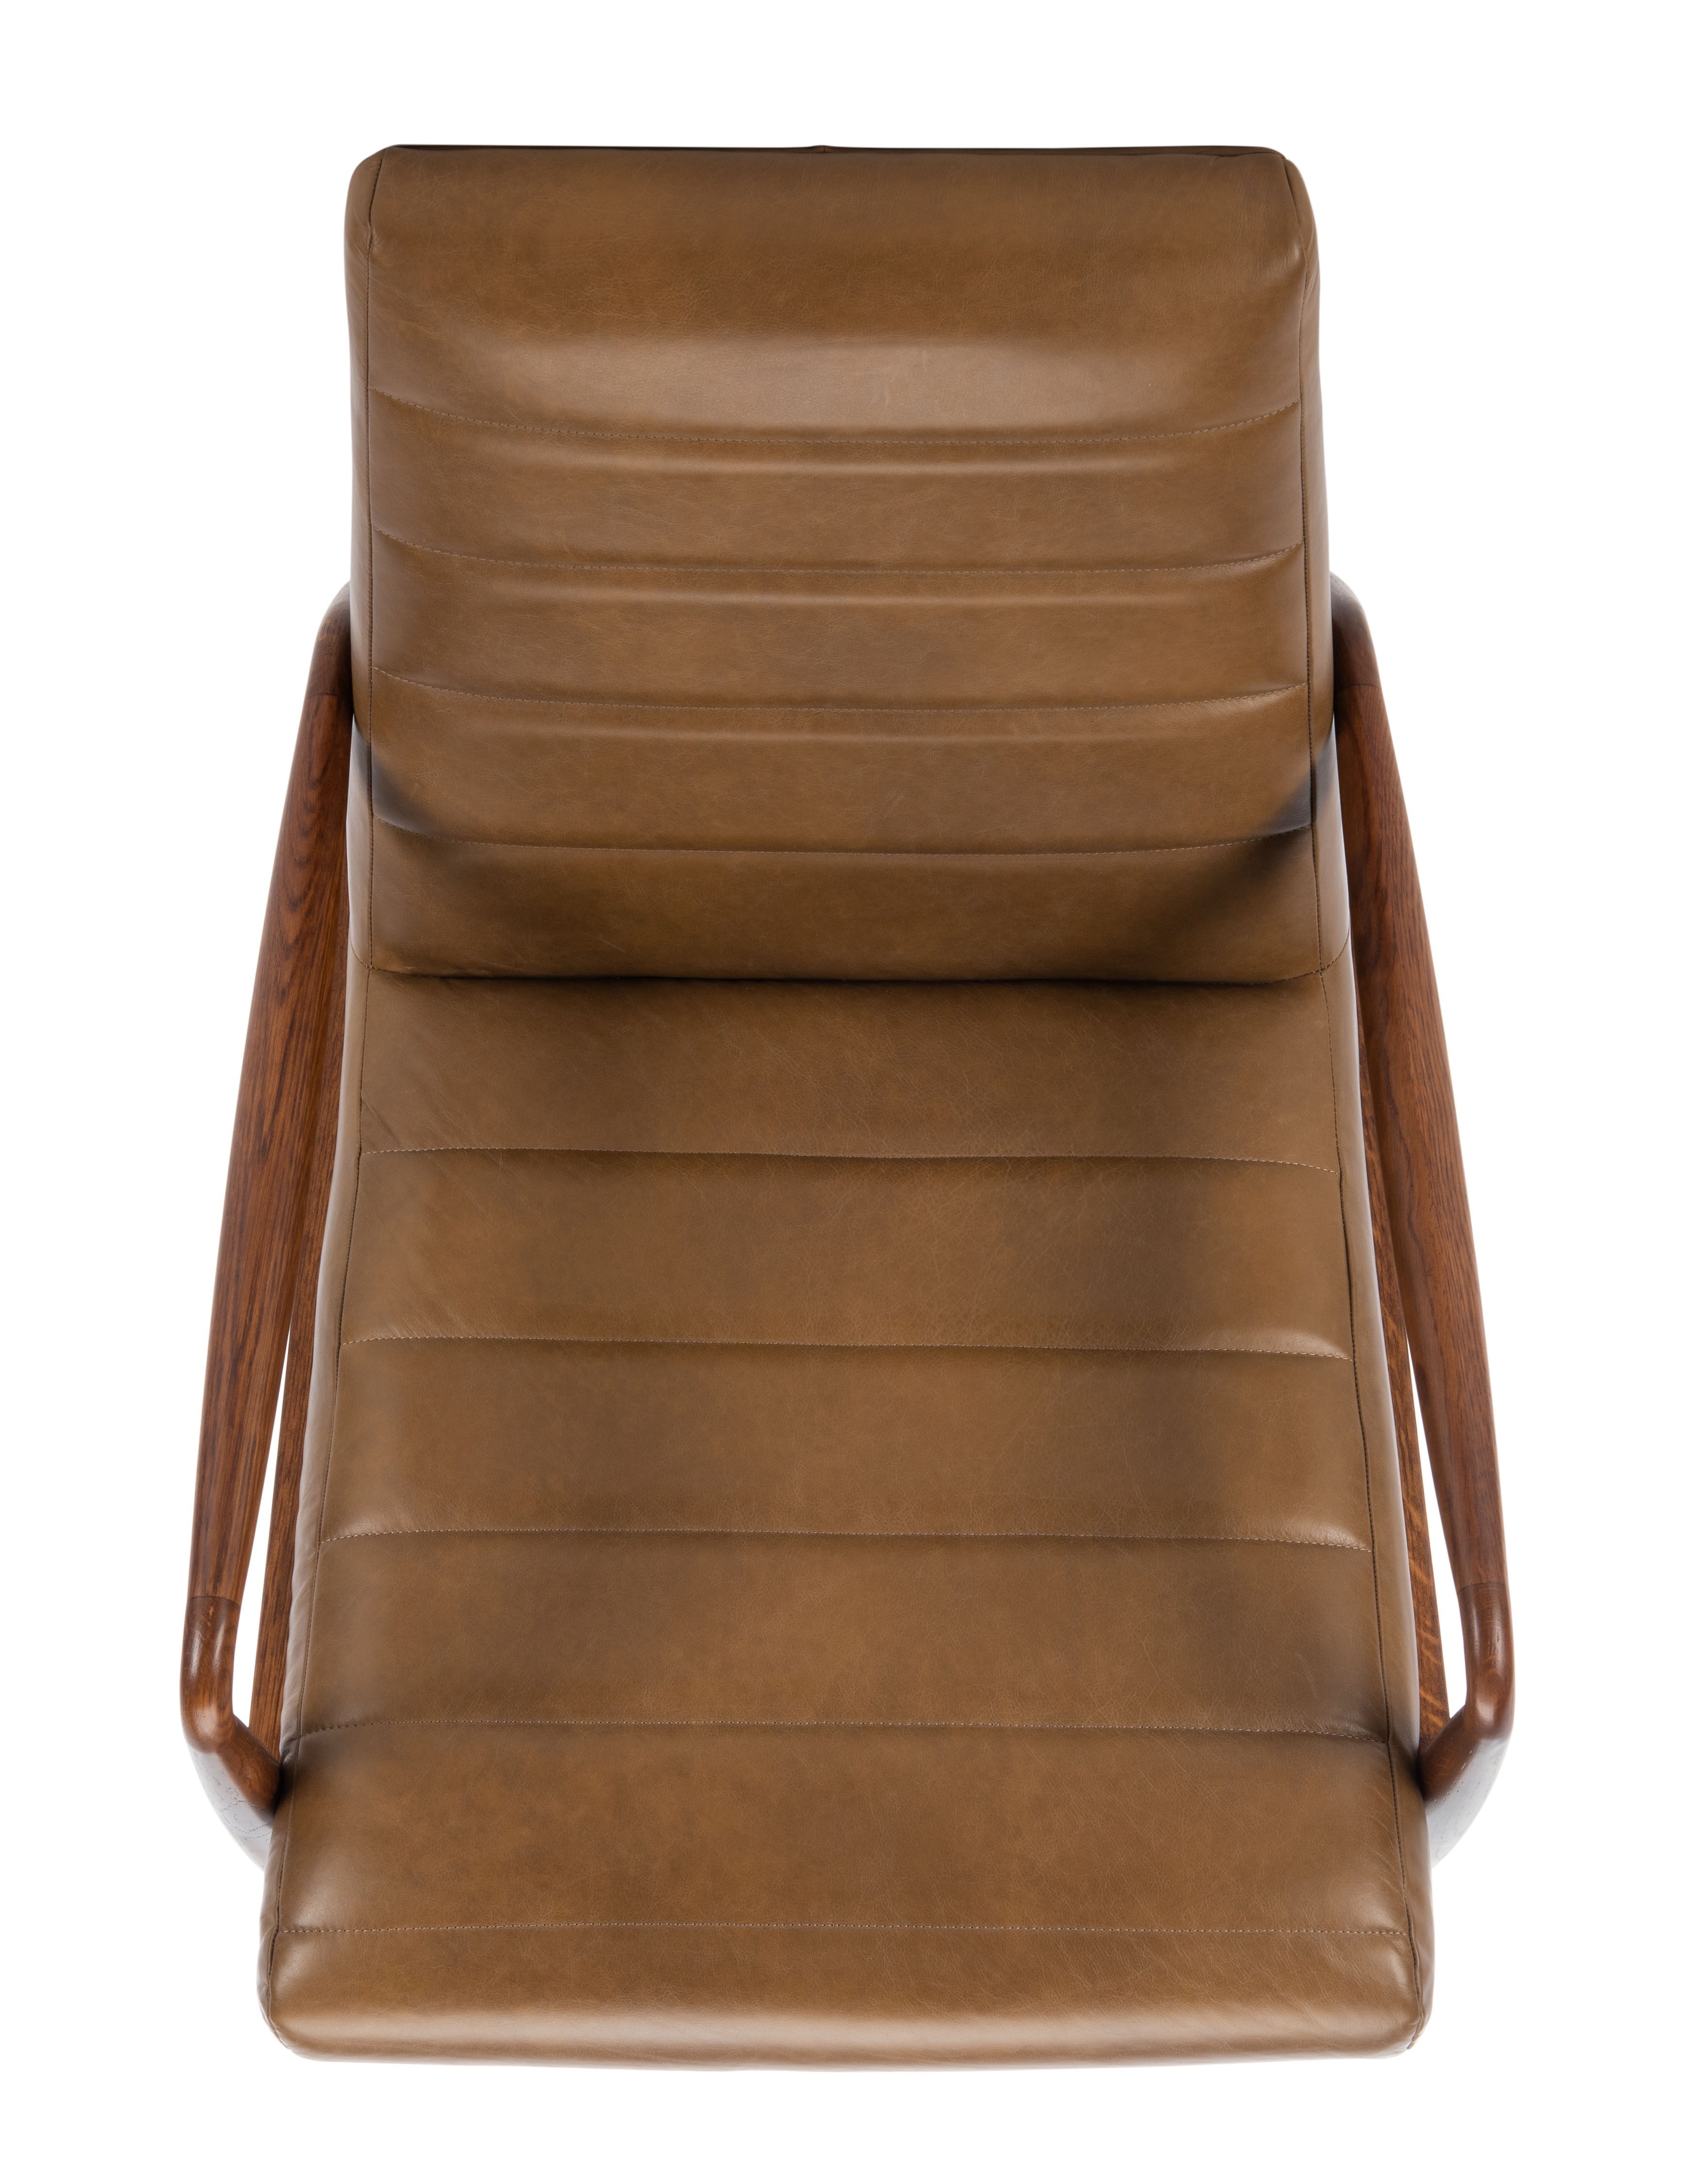 Willow Channel Tufted Arm Chair - Gingerbread/Dark Walnut  - Arlo Home - Image 3